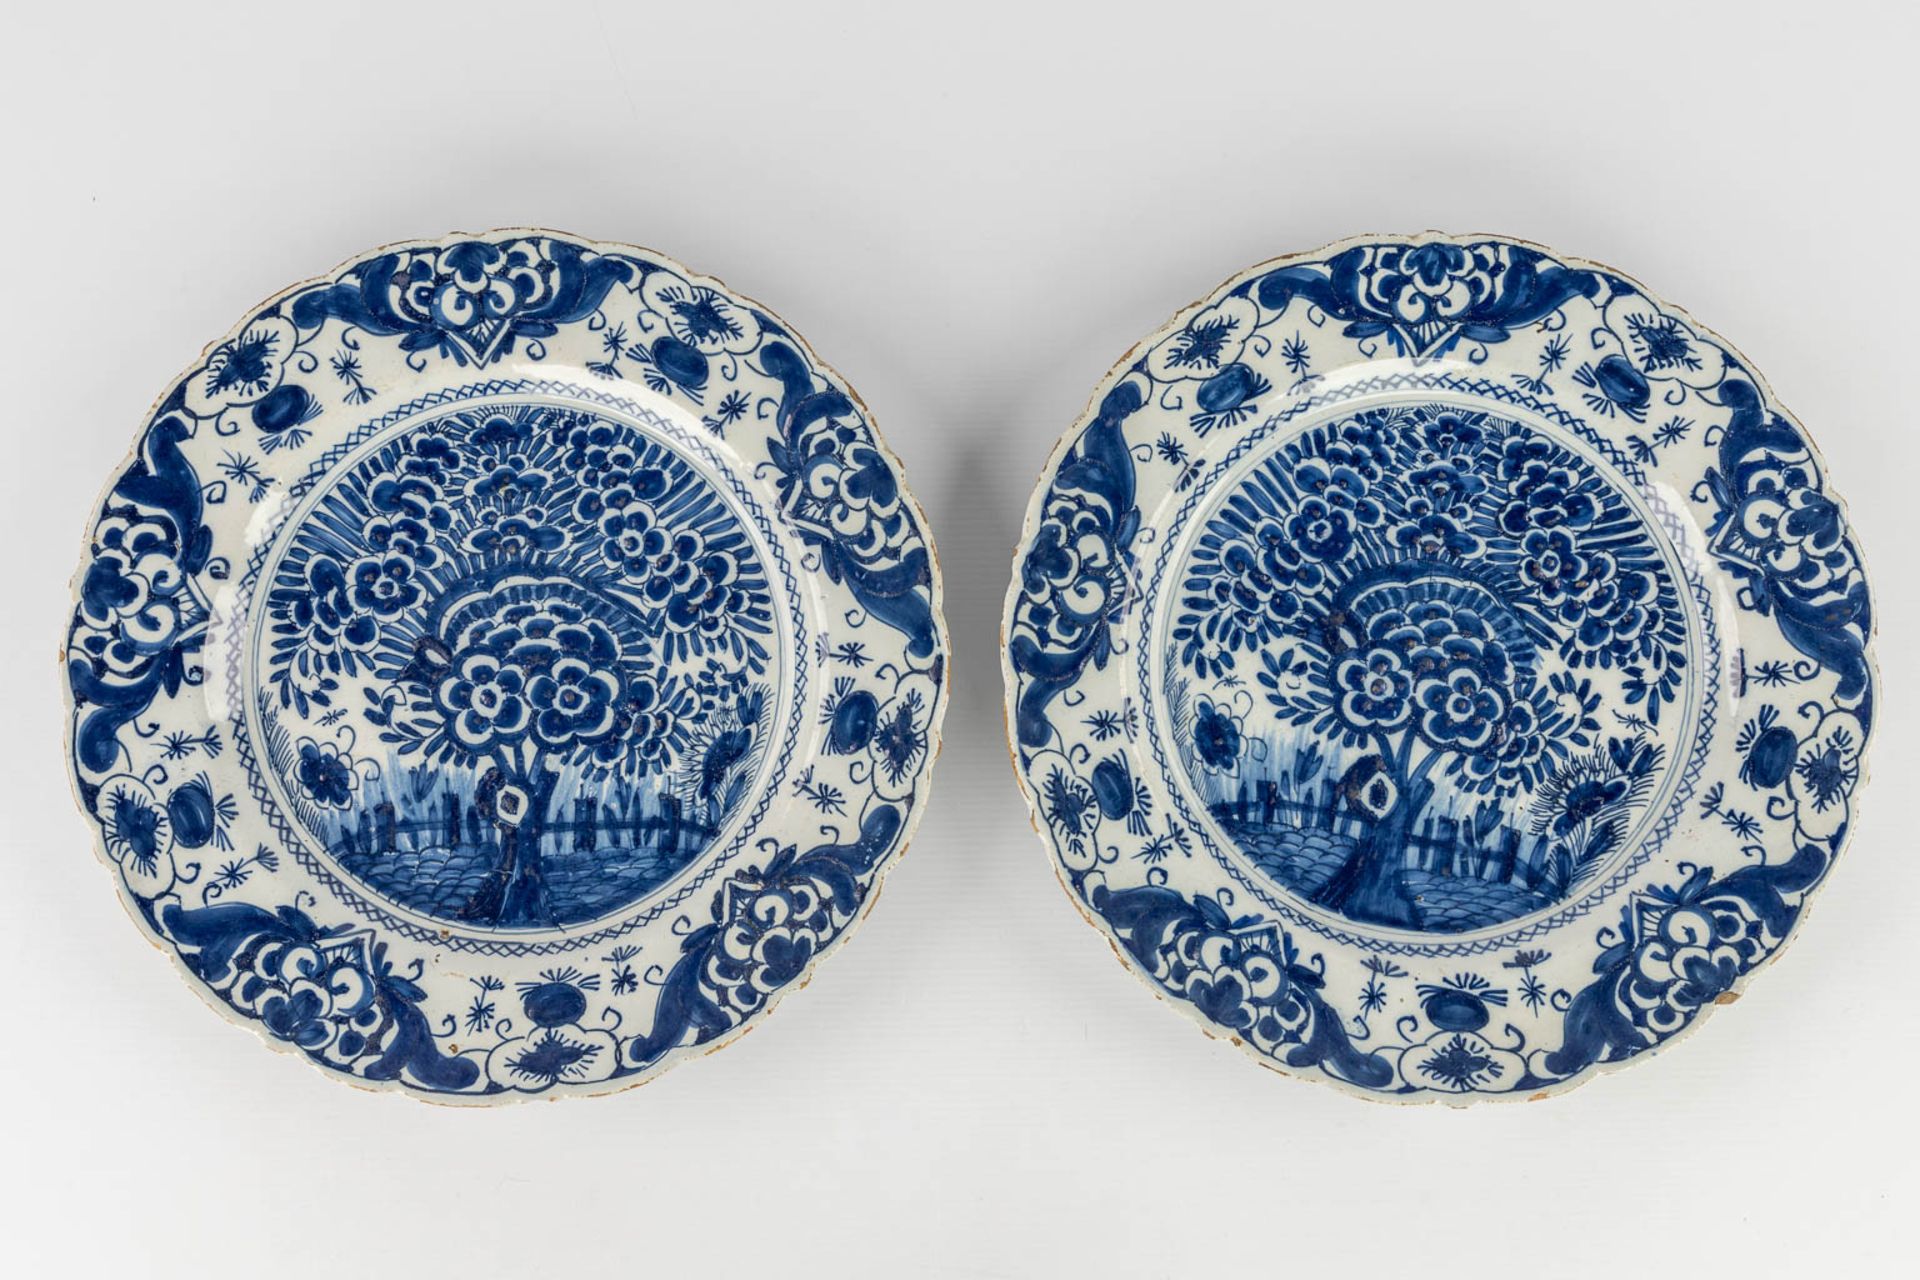 12 plates 'Peacock' or 'Pauwstaart', Delft, 18th C. (D:34,5 cm) - Image 9 of 18